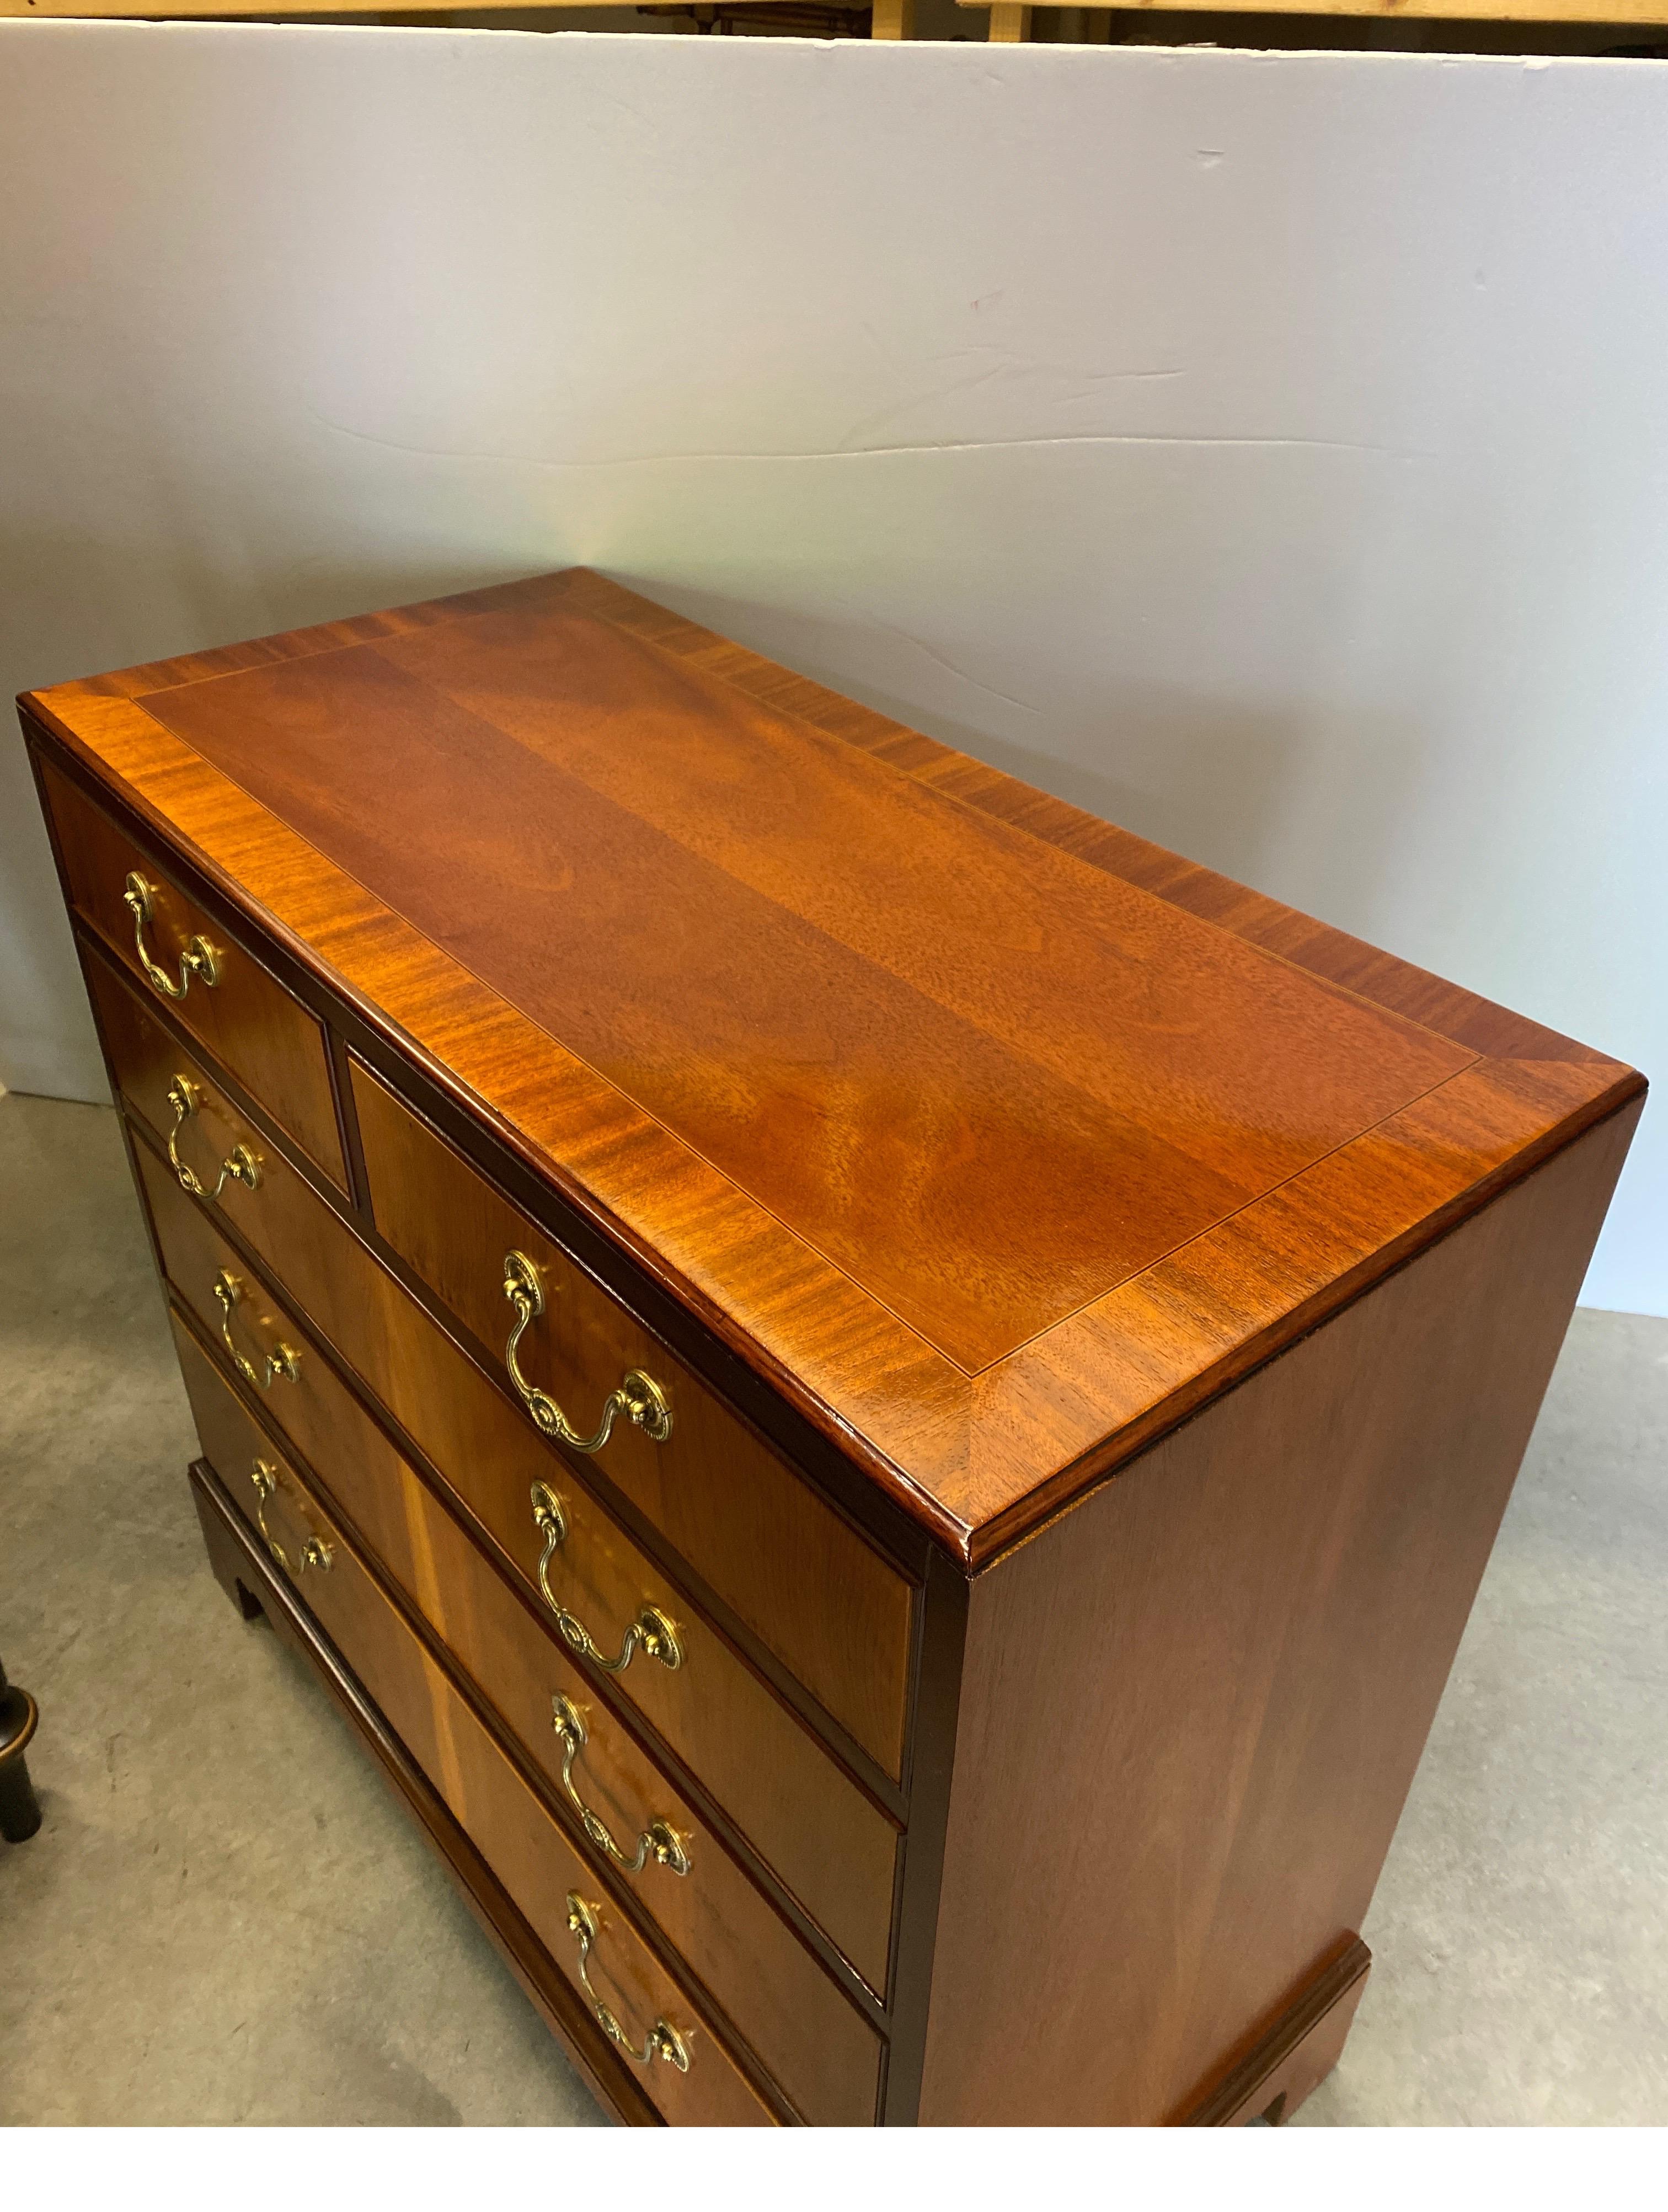 Mahogany and Yew Wood Bachelors Chest by Baker Furniture 1